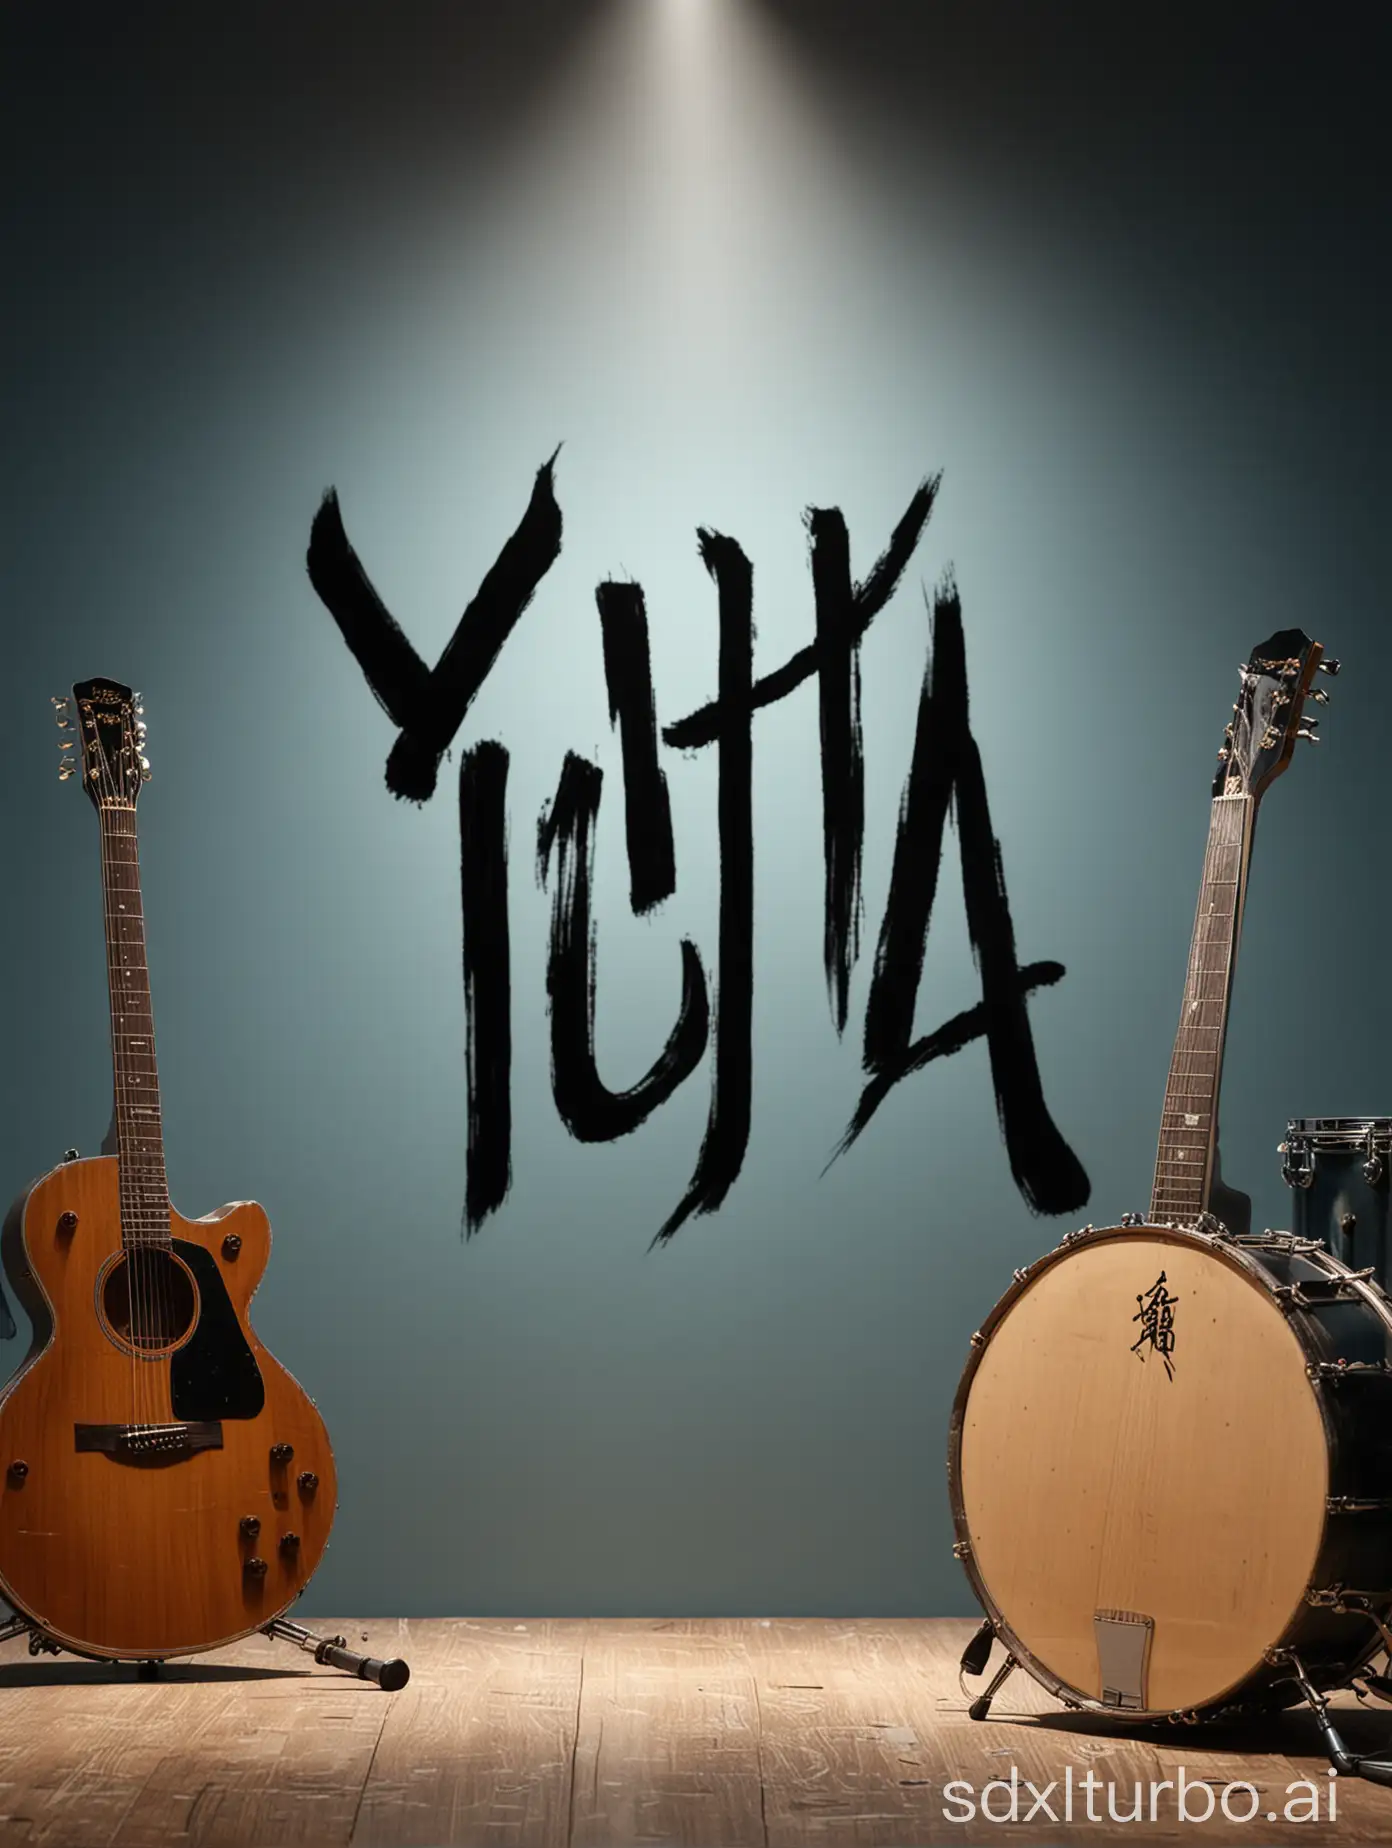 Musical-Instruments-Guitar-and-Drum-Set-with-YIJIA-MUSIC